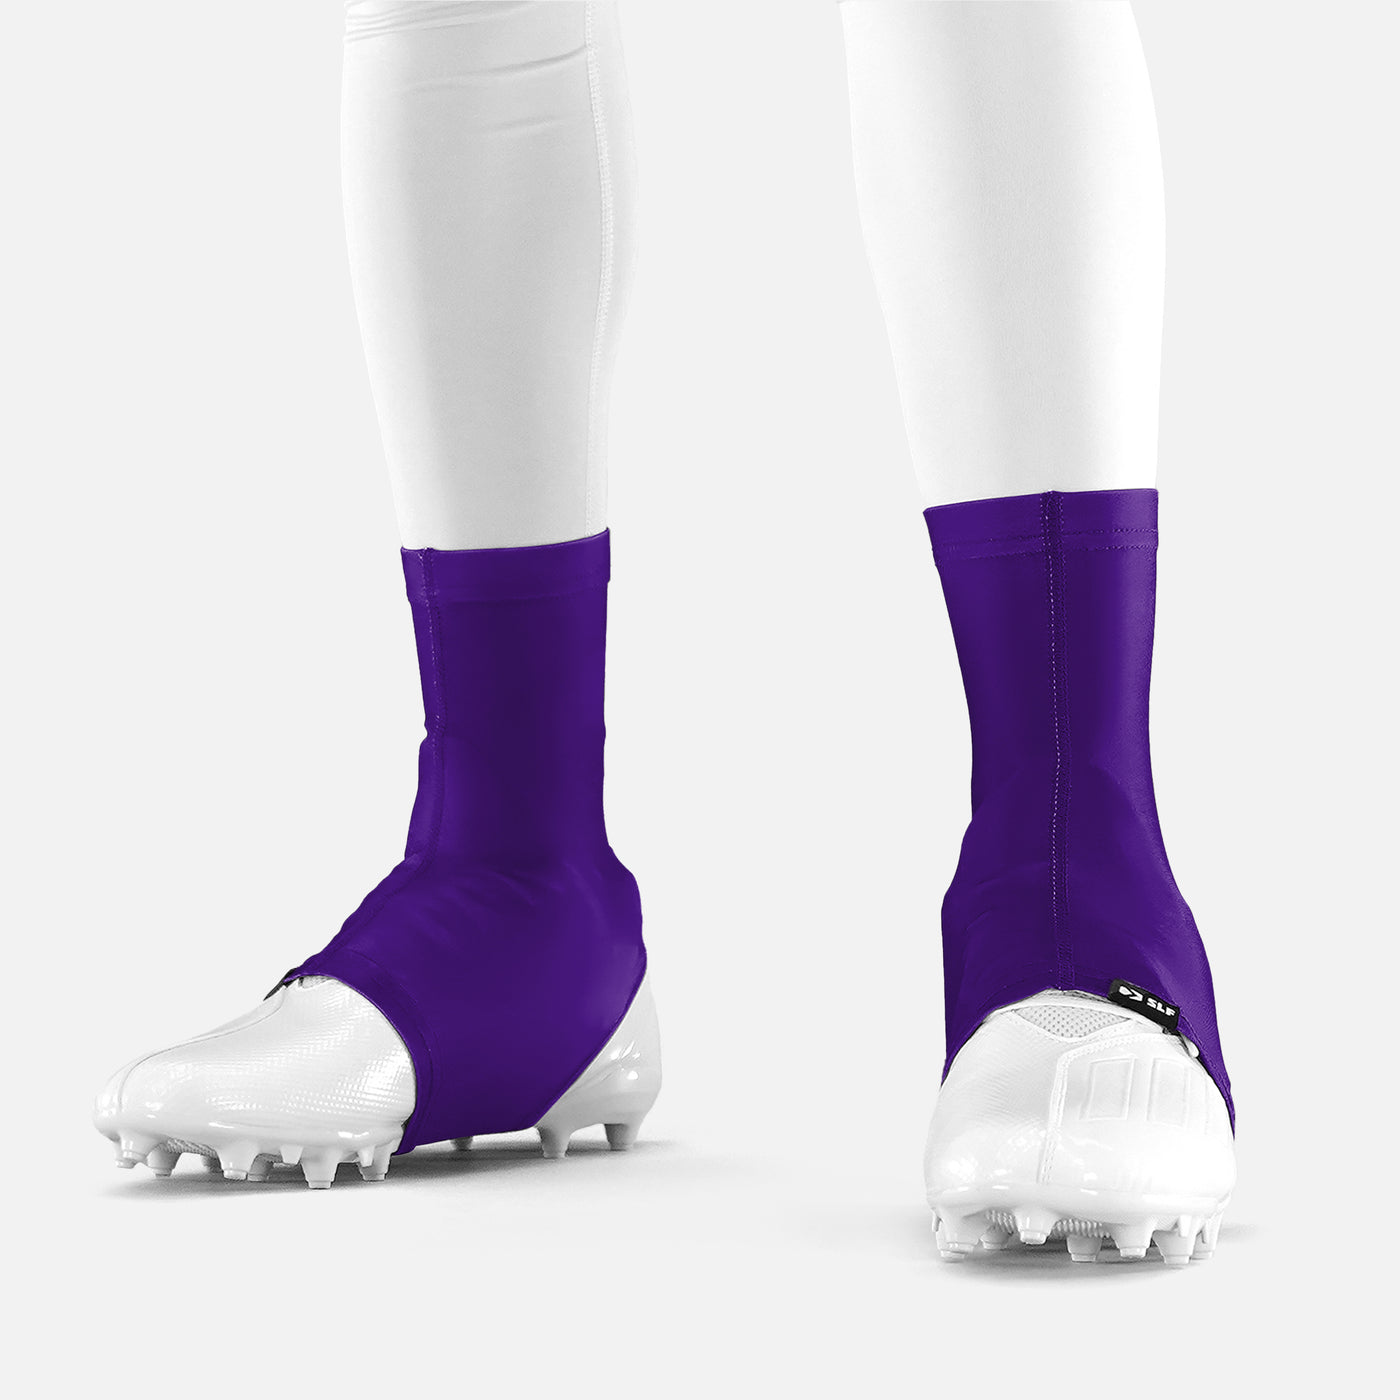 Hue Purple Spats / Cleat Covers